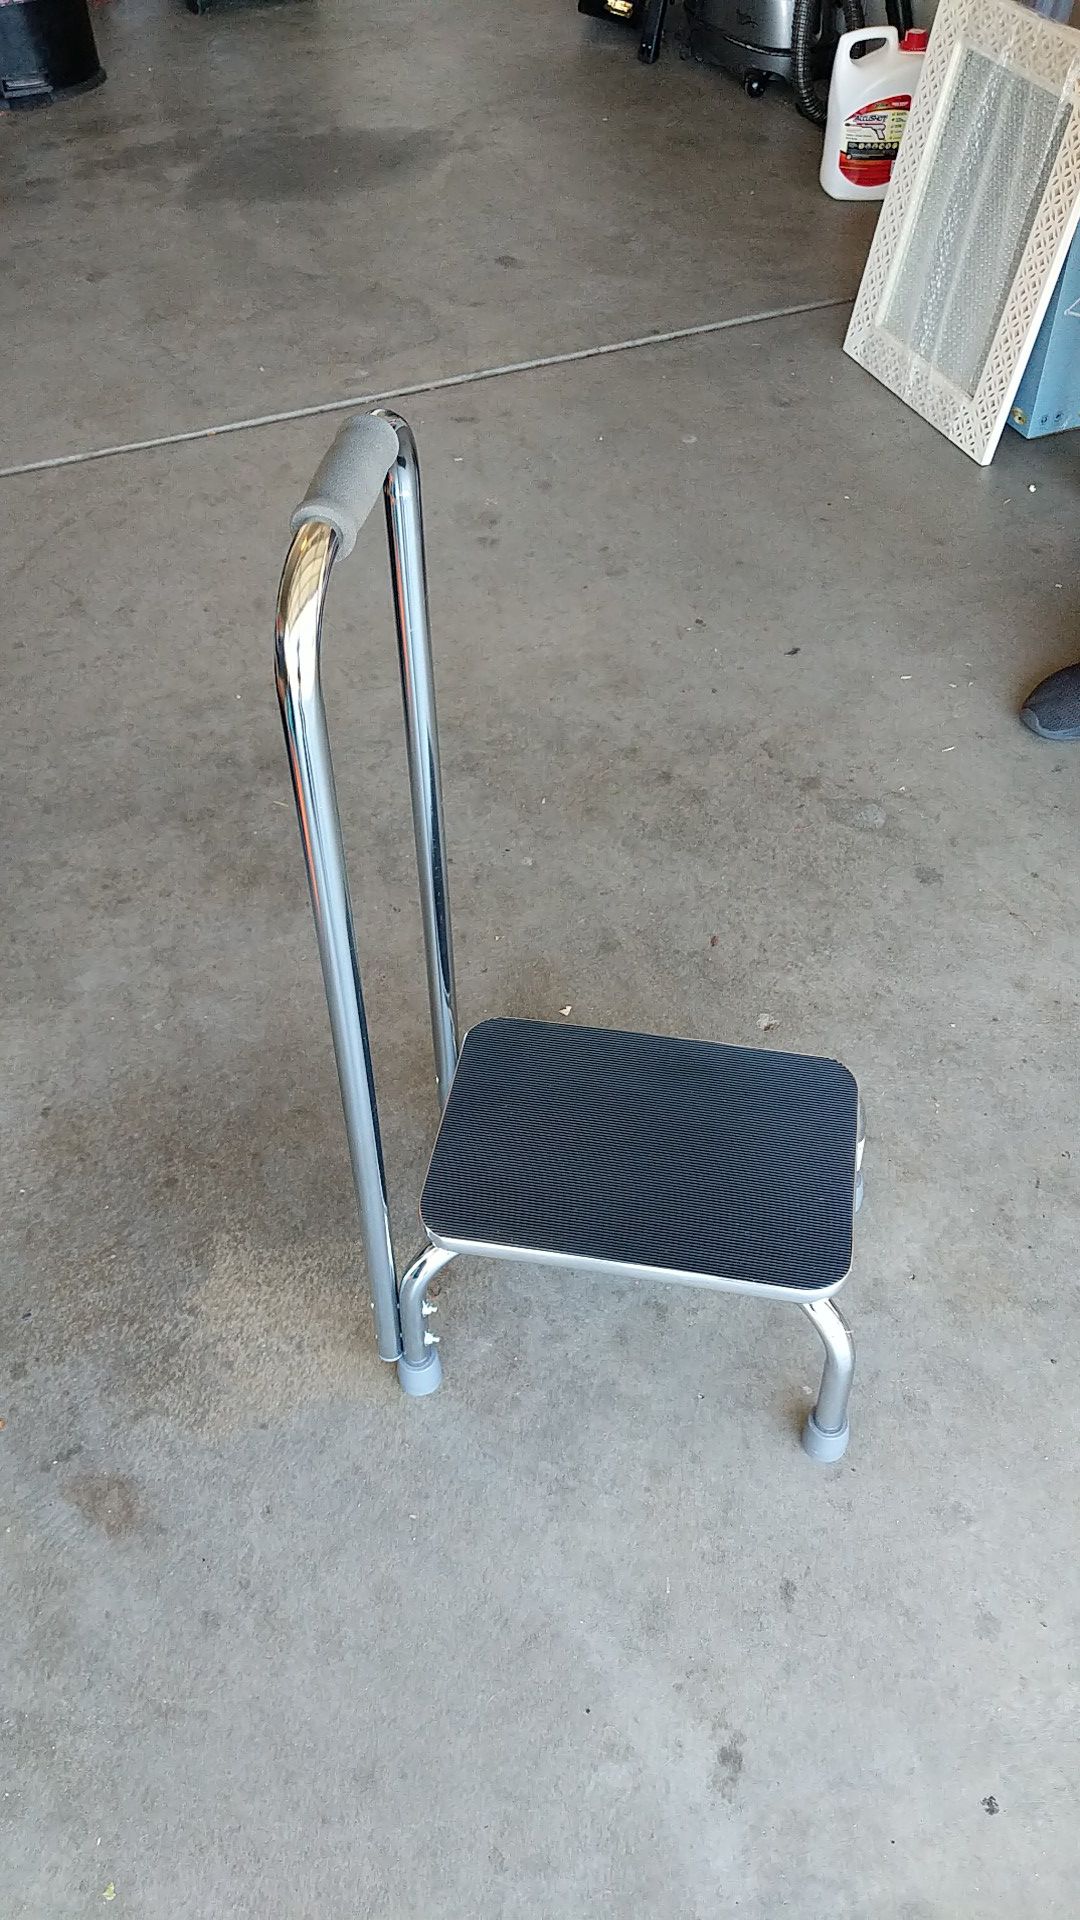 Step stool with support handle